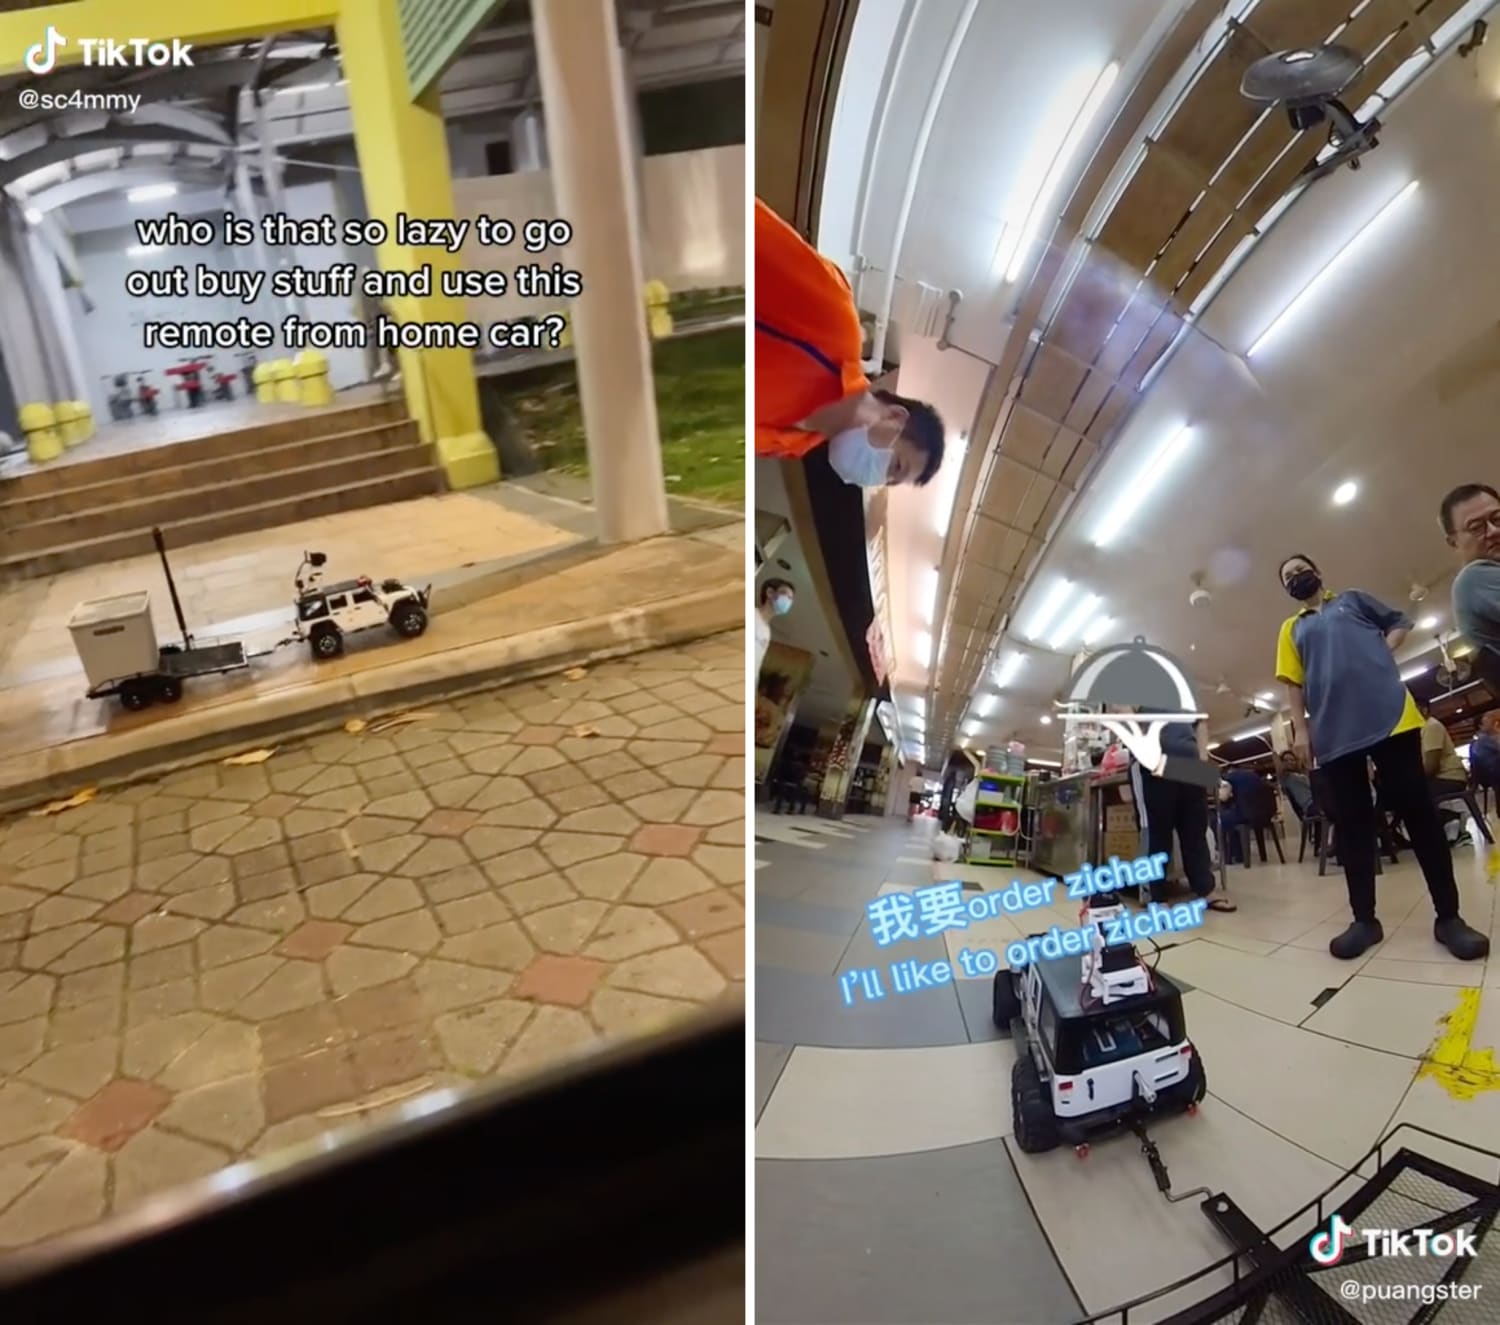 A remote-control car enthusiast has been putting up videos of his little invention on TikTok, showing how it picks up snacks and dinner for him.